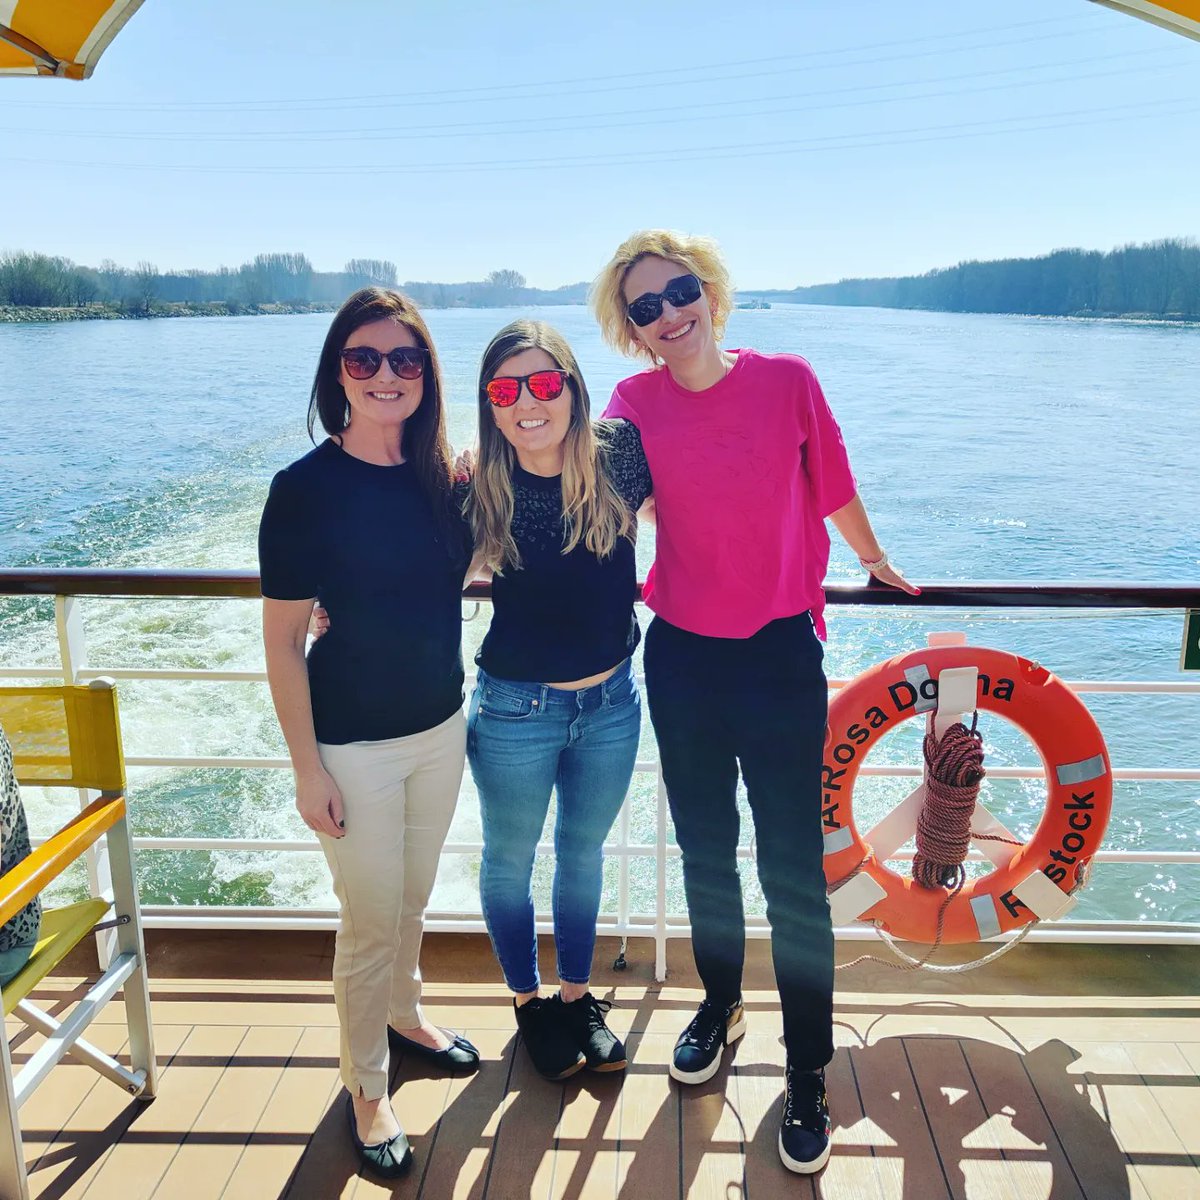 Thank you @arosa_cruises @lucica75 @MadsRoastPR for such a relaxed, fun and refreshingly different experience of river cruising on A-Rosa Donna. #Budapest #Bratislava #Vienna #Danube #Cruise #RiverCruise #FamilyCruise #Touchdown